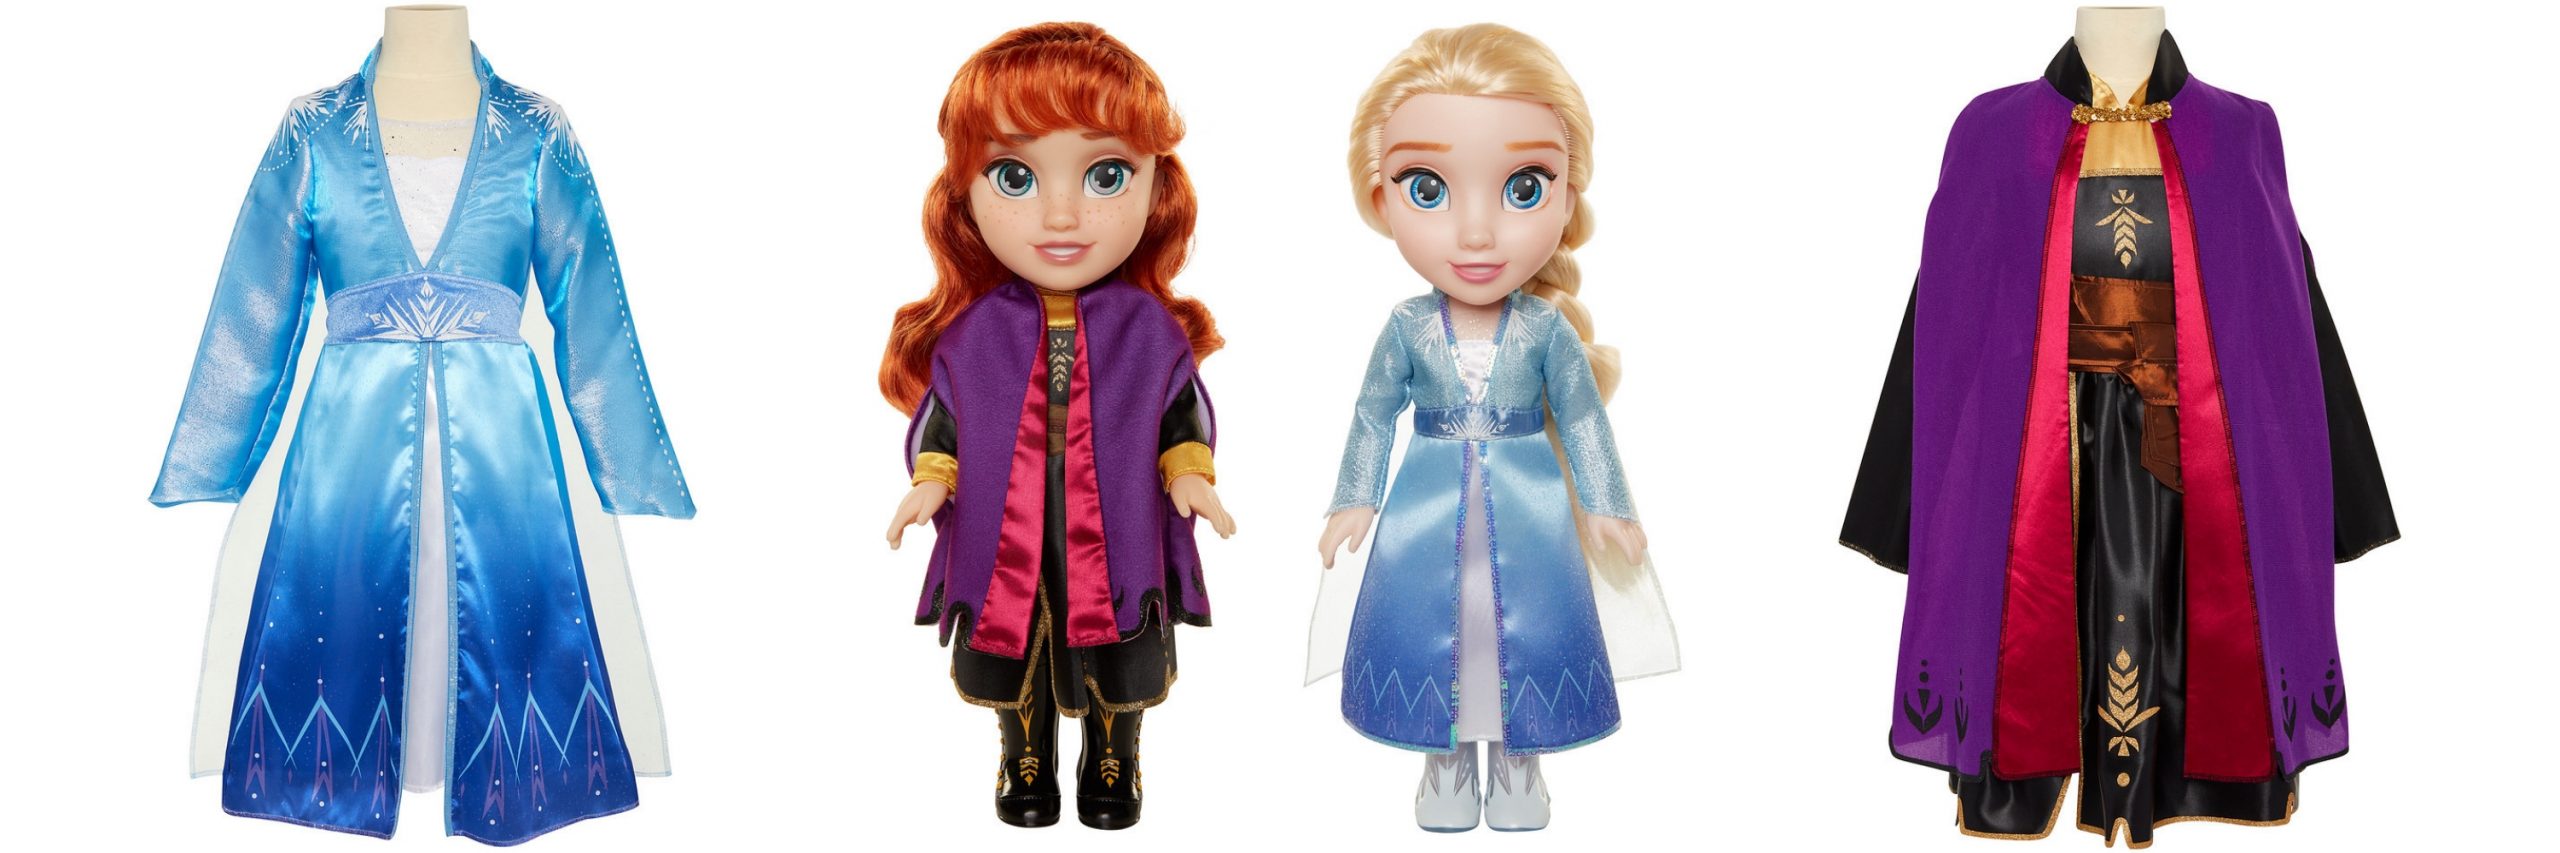 From costumes to dolls, these pieces of Frozen 2 merchandise are the best holiday gift ideas!